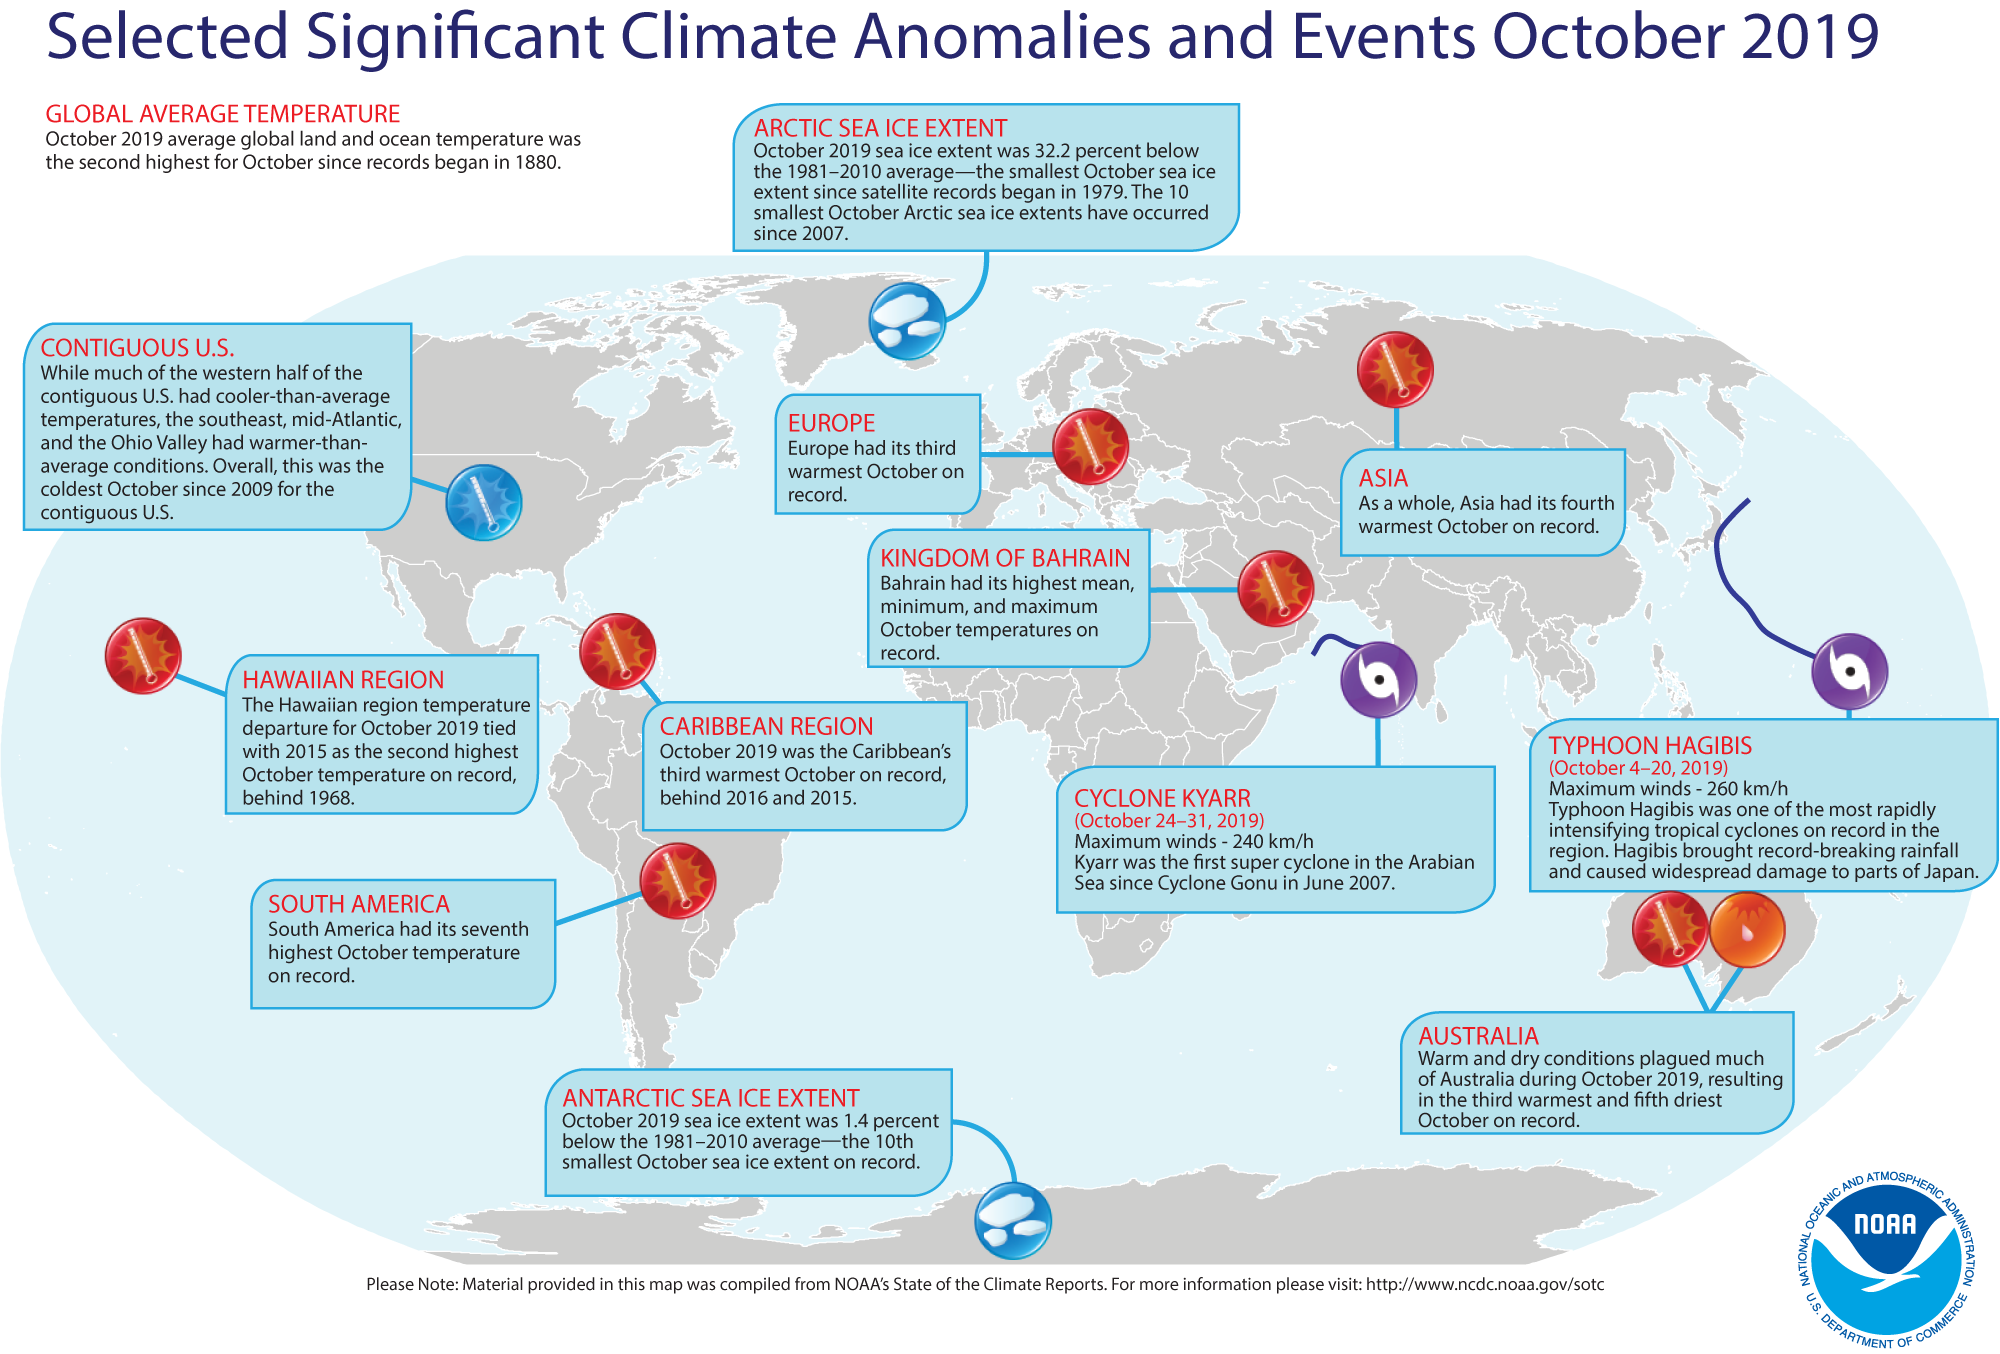 Second warmest October on record